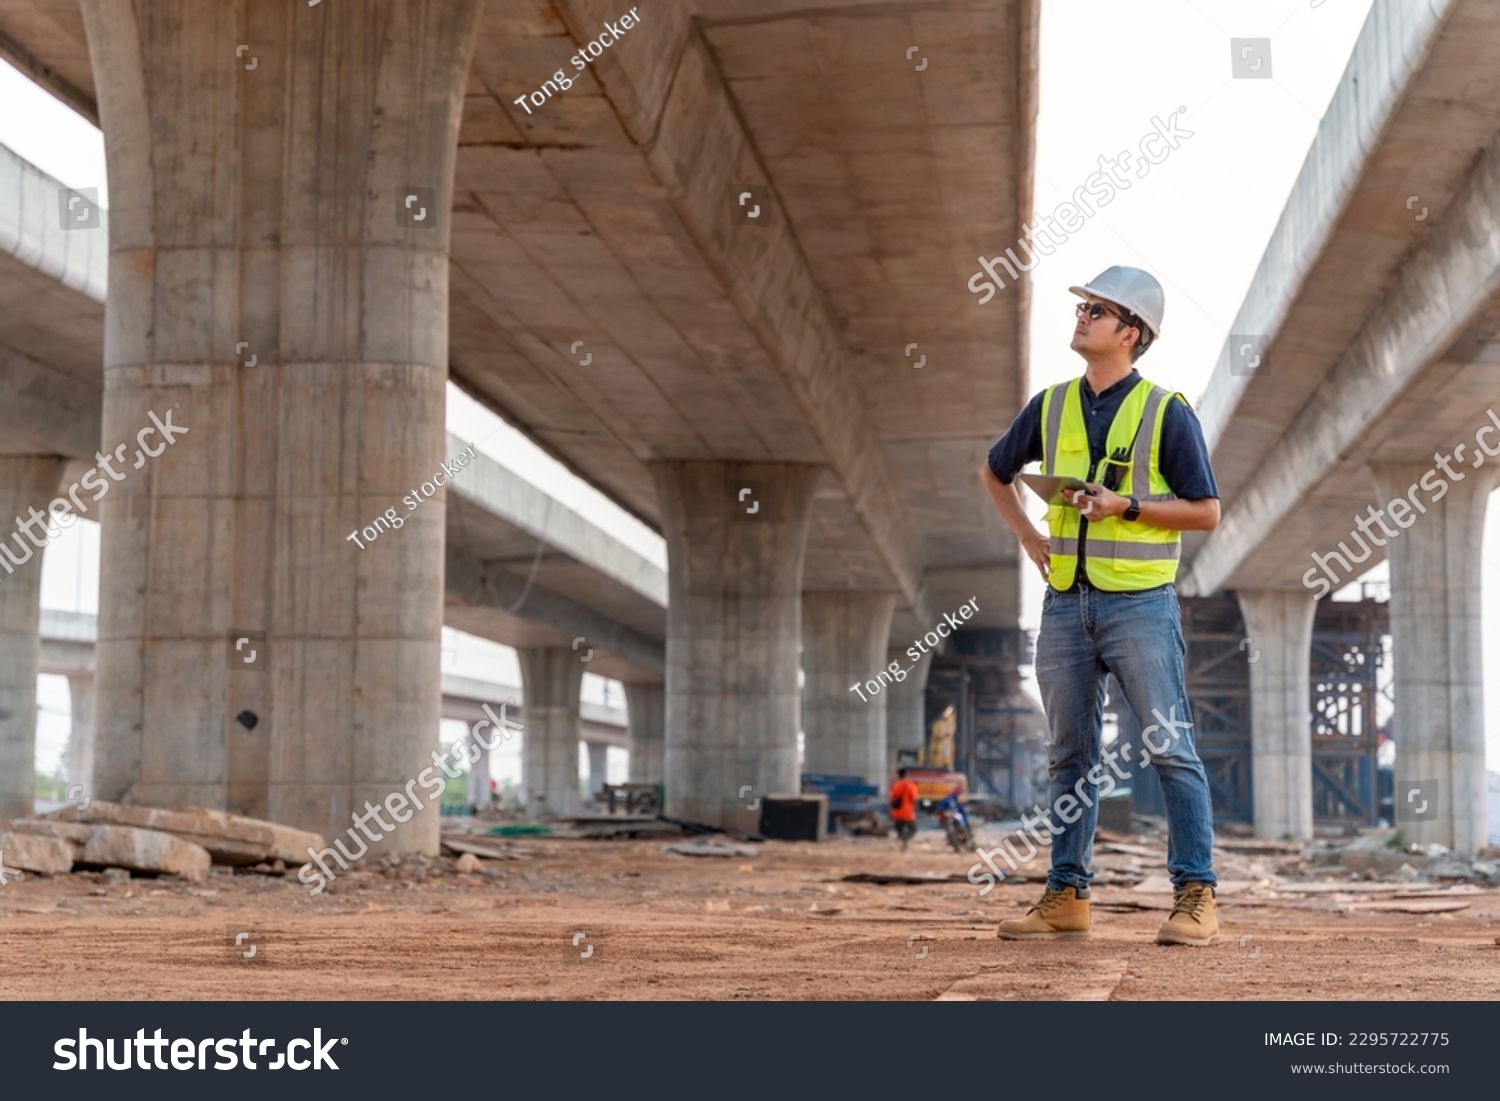 A civil engineer is inspecting a road or expressway construction project under a road under construction. #2295722775